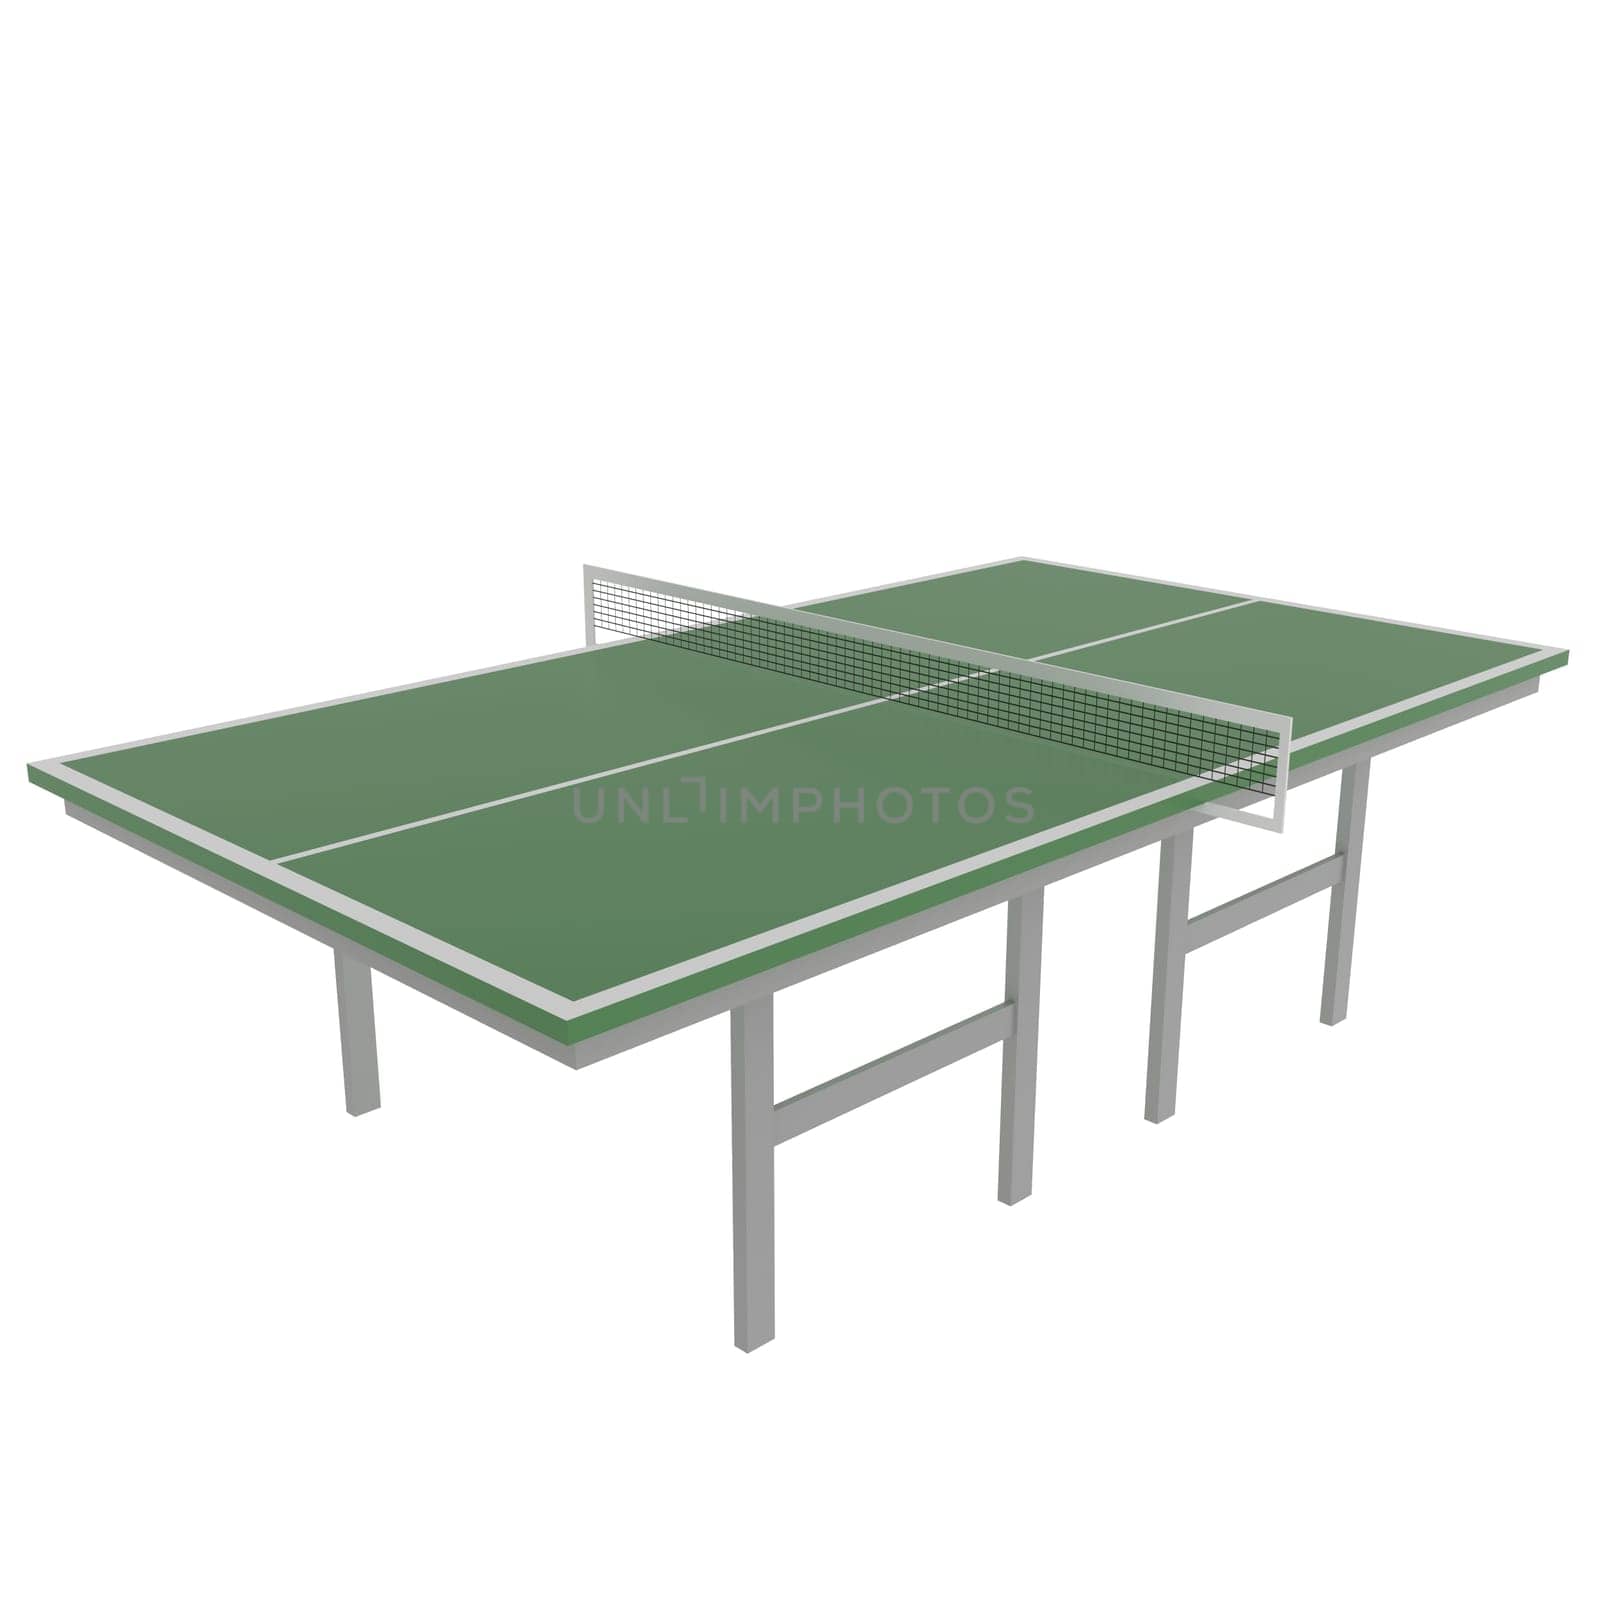 Table Tennis isolated on white background. High quality 3d illustration